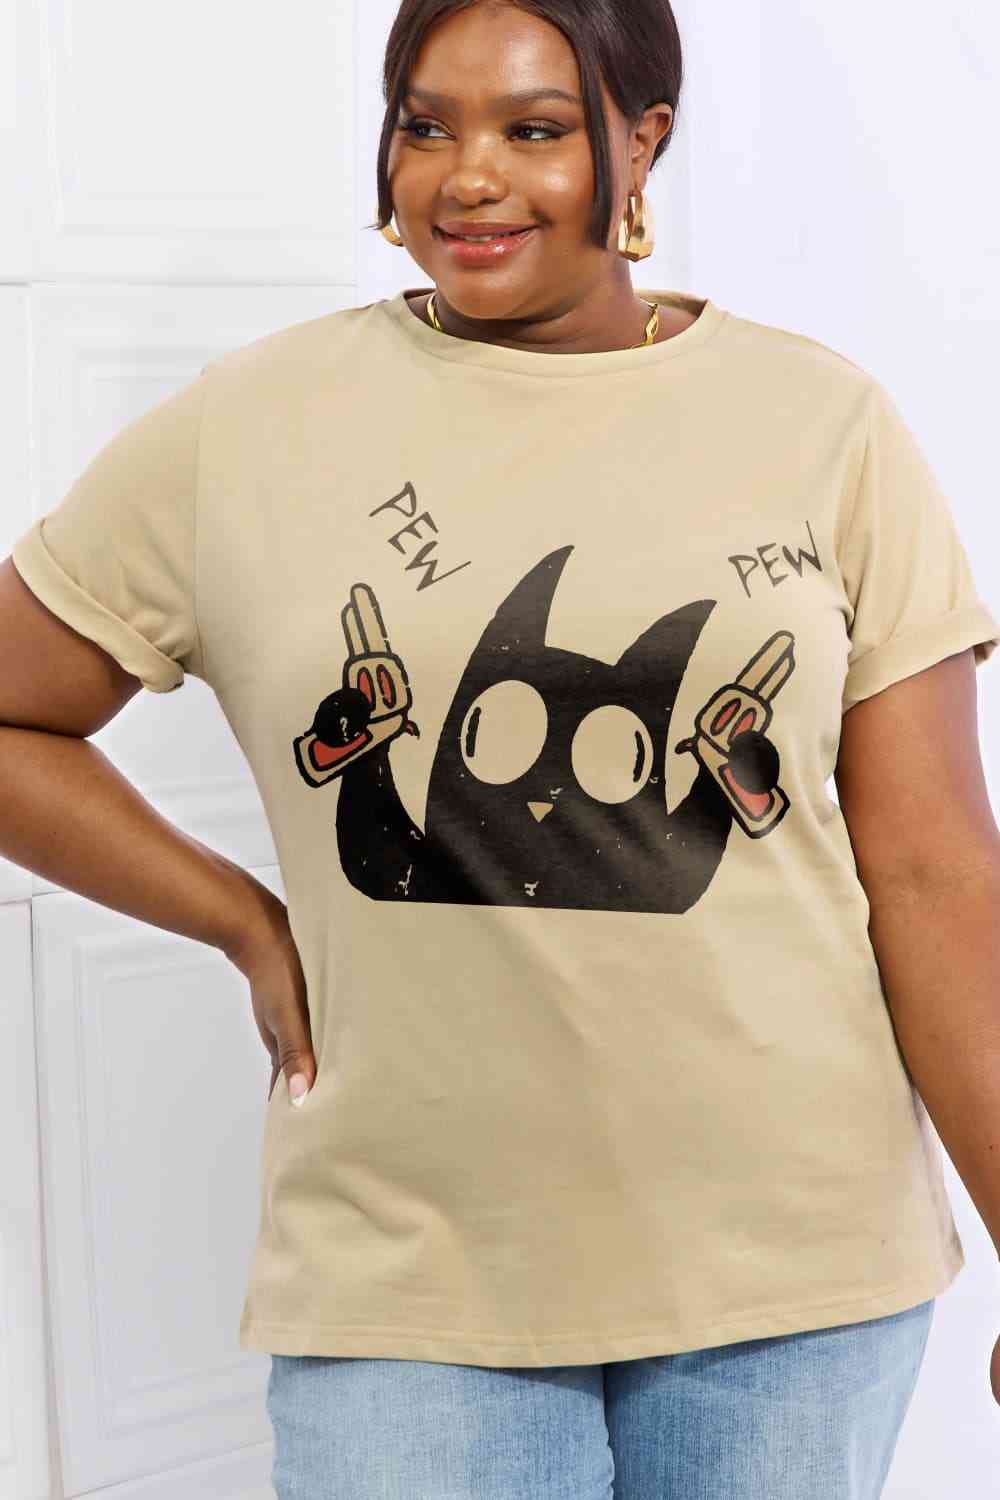 PEW PEW Graphic Tee (S-3XL)